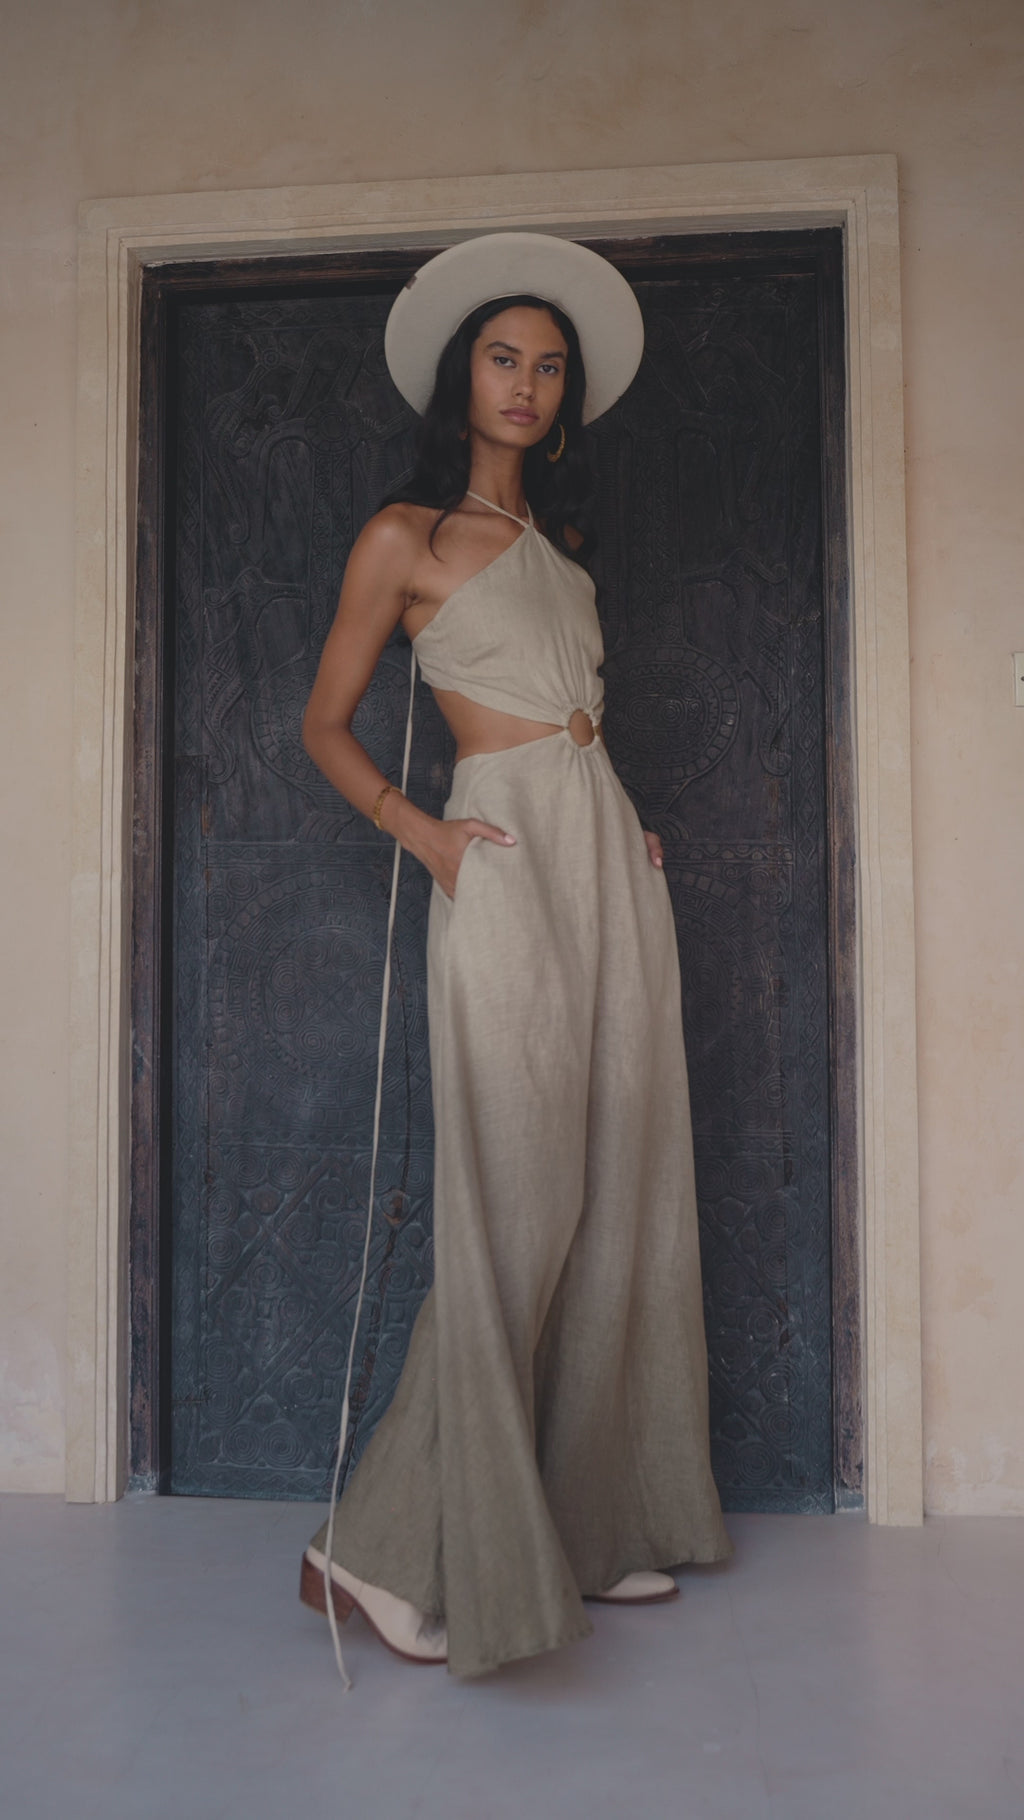 Ombre Party Dress in Sage Green and Grey - Unique Goddess style with open back and sides, made from breathable organic linen, tailored to fit and comfort.